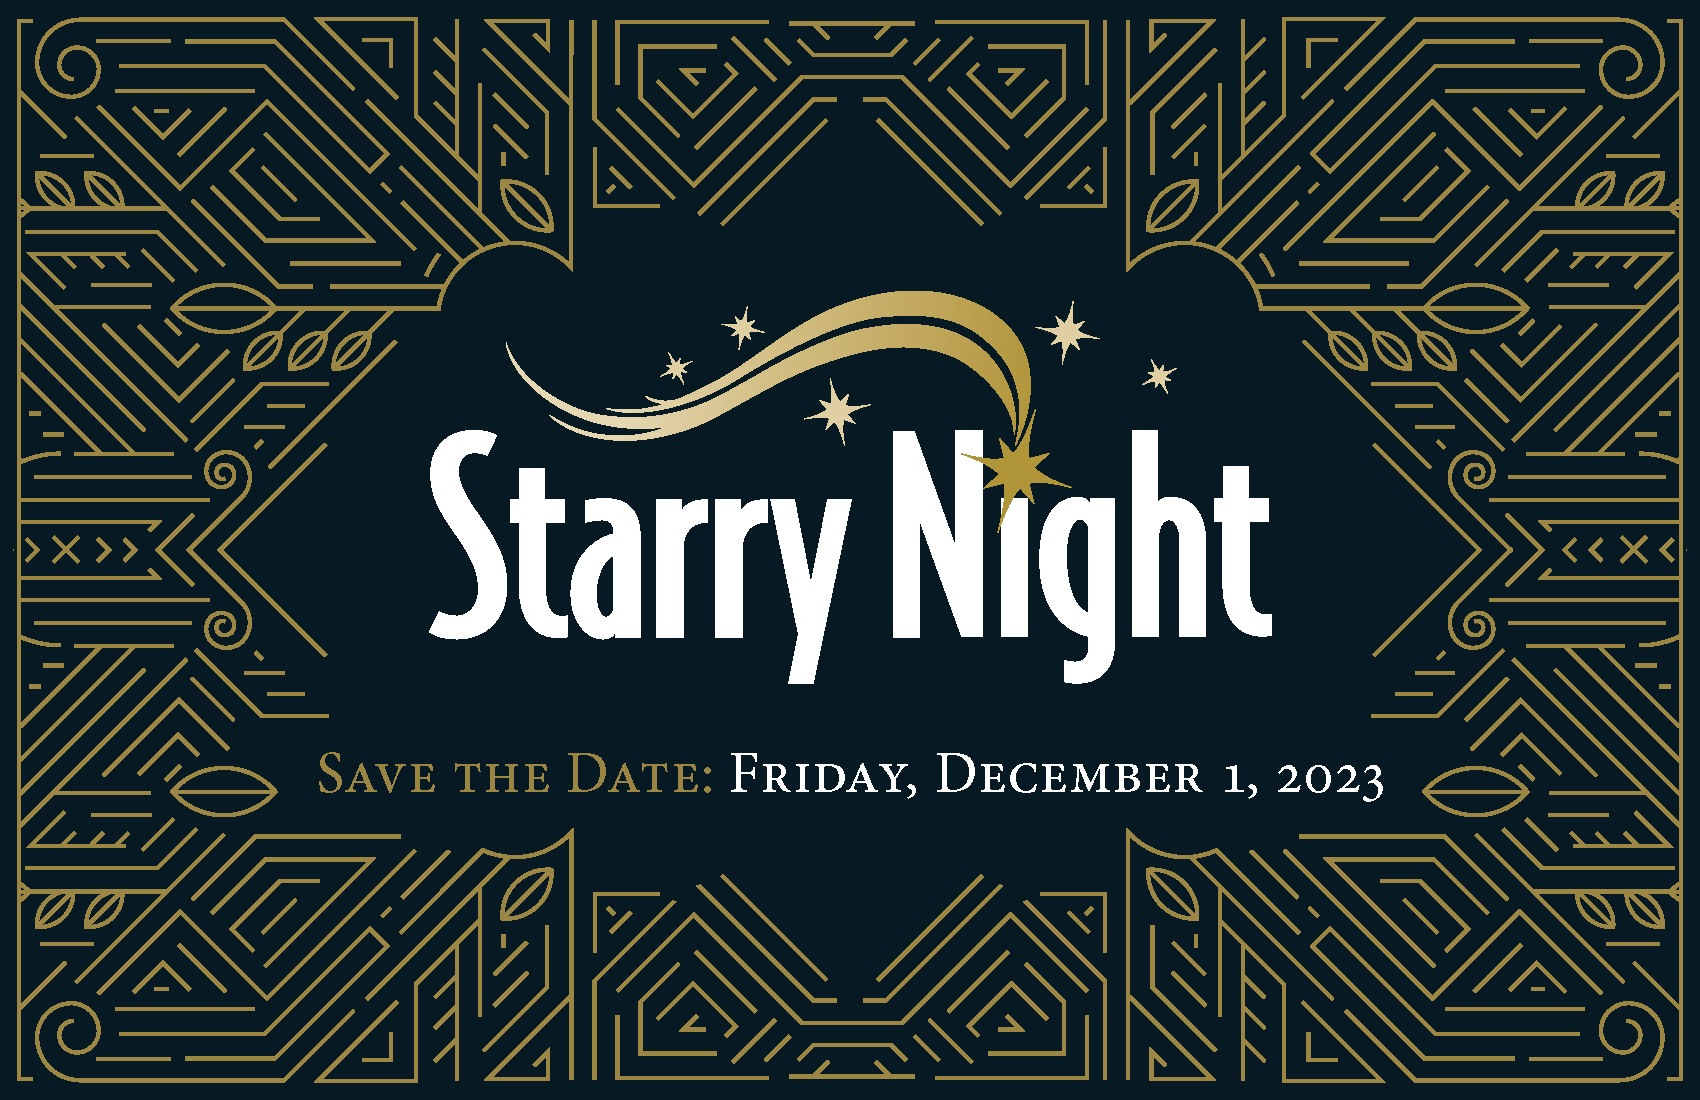 https://www.carrollcc.edu/wp-content/uploads/016-07-23-FDN-Starry-Night-2023-Save-the-Date-PC-WEB.png